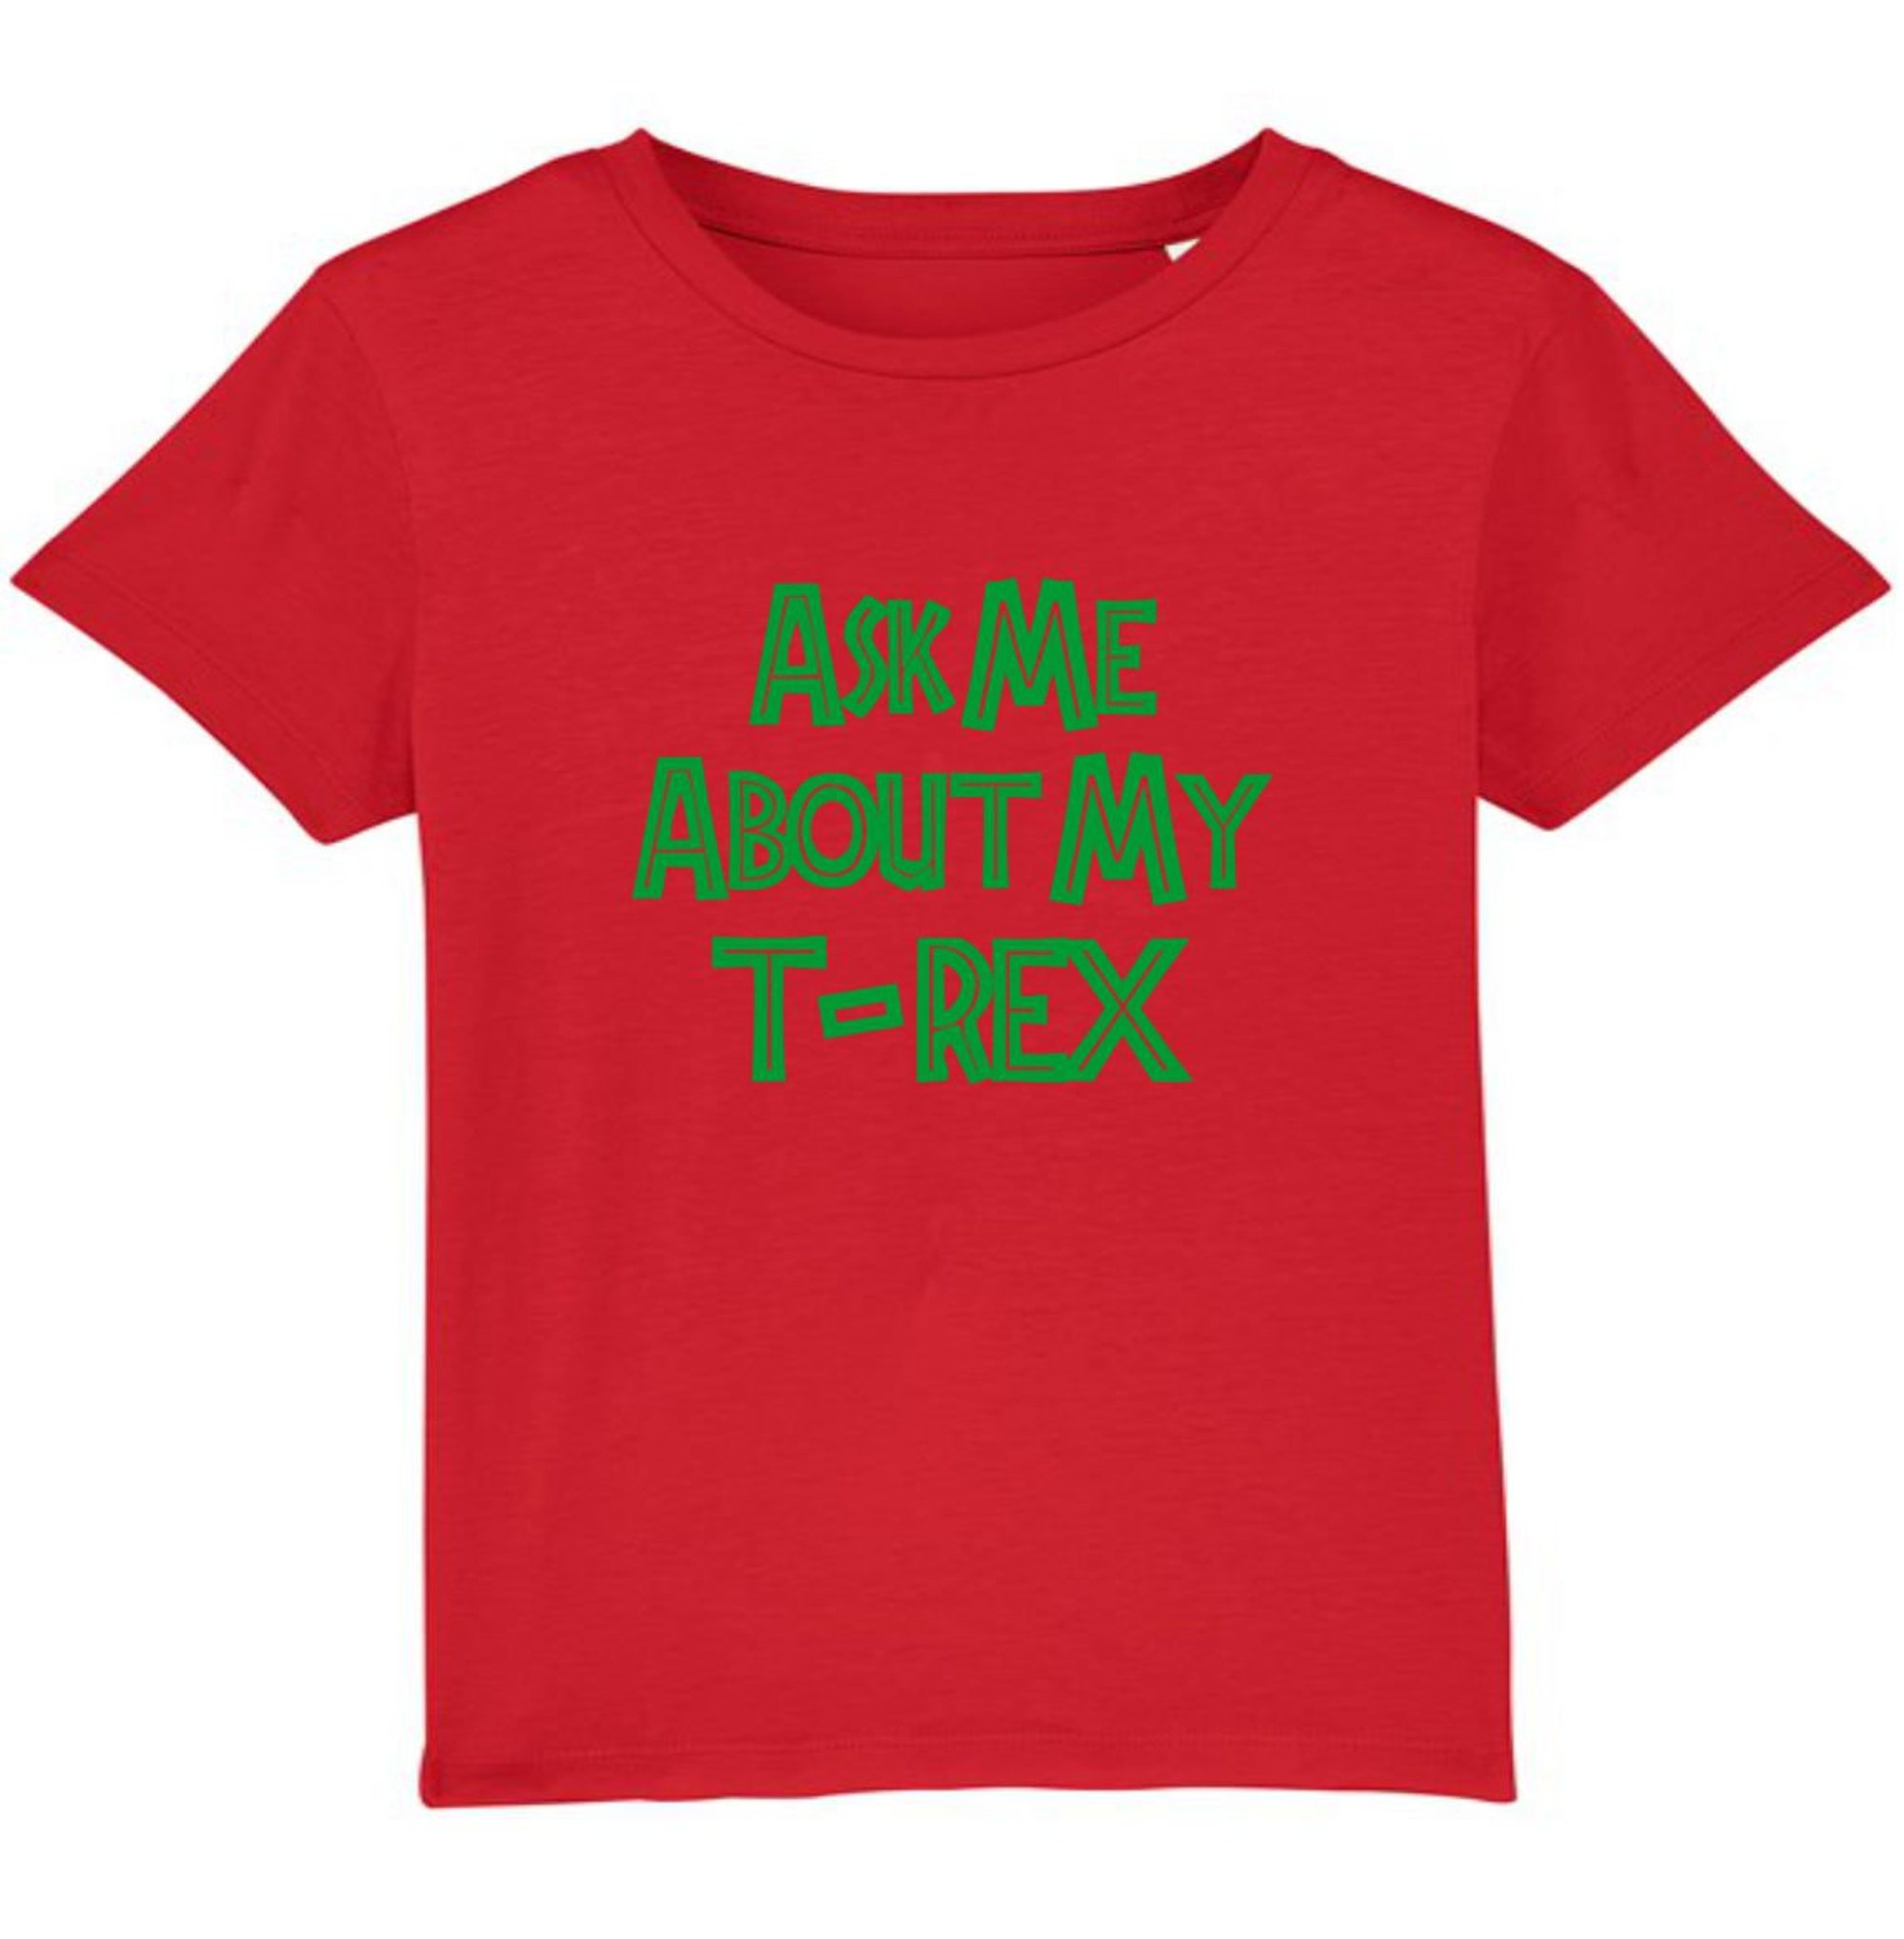 Discover Ask Me About My T-Rex T-Shirt, Funny Dinosaur Flip Gift Joke Costume